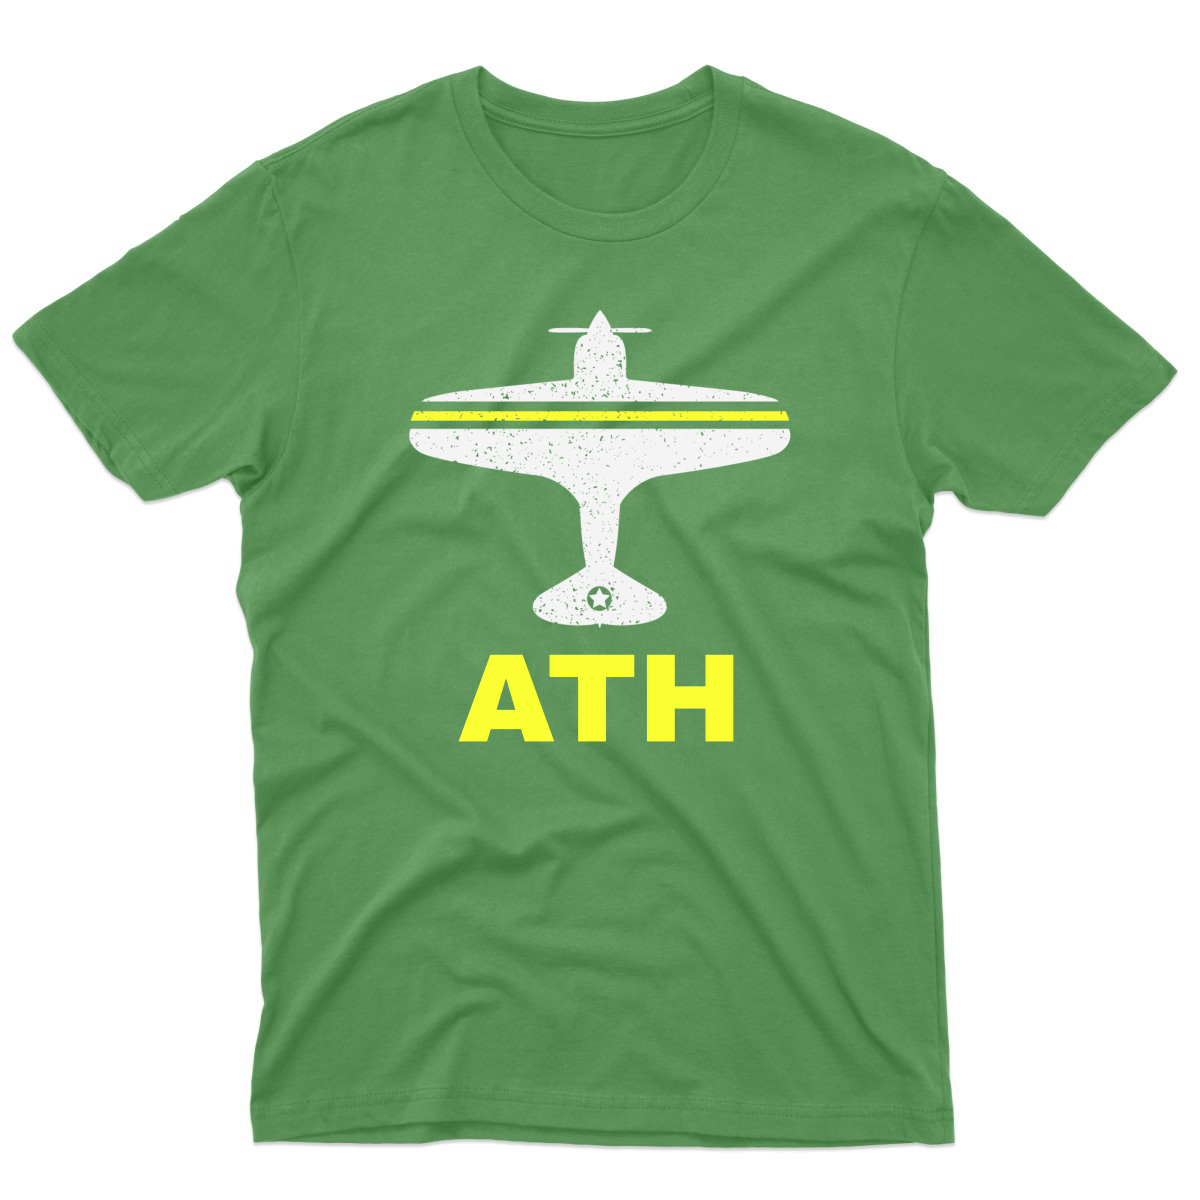 Fly Athens ATH Airport Men's T-shirt | Green